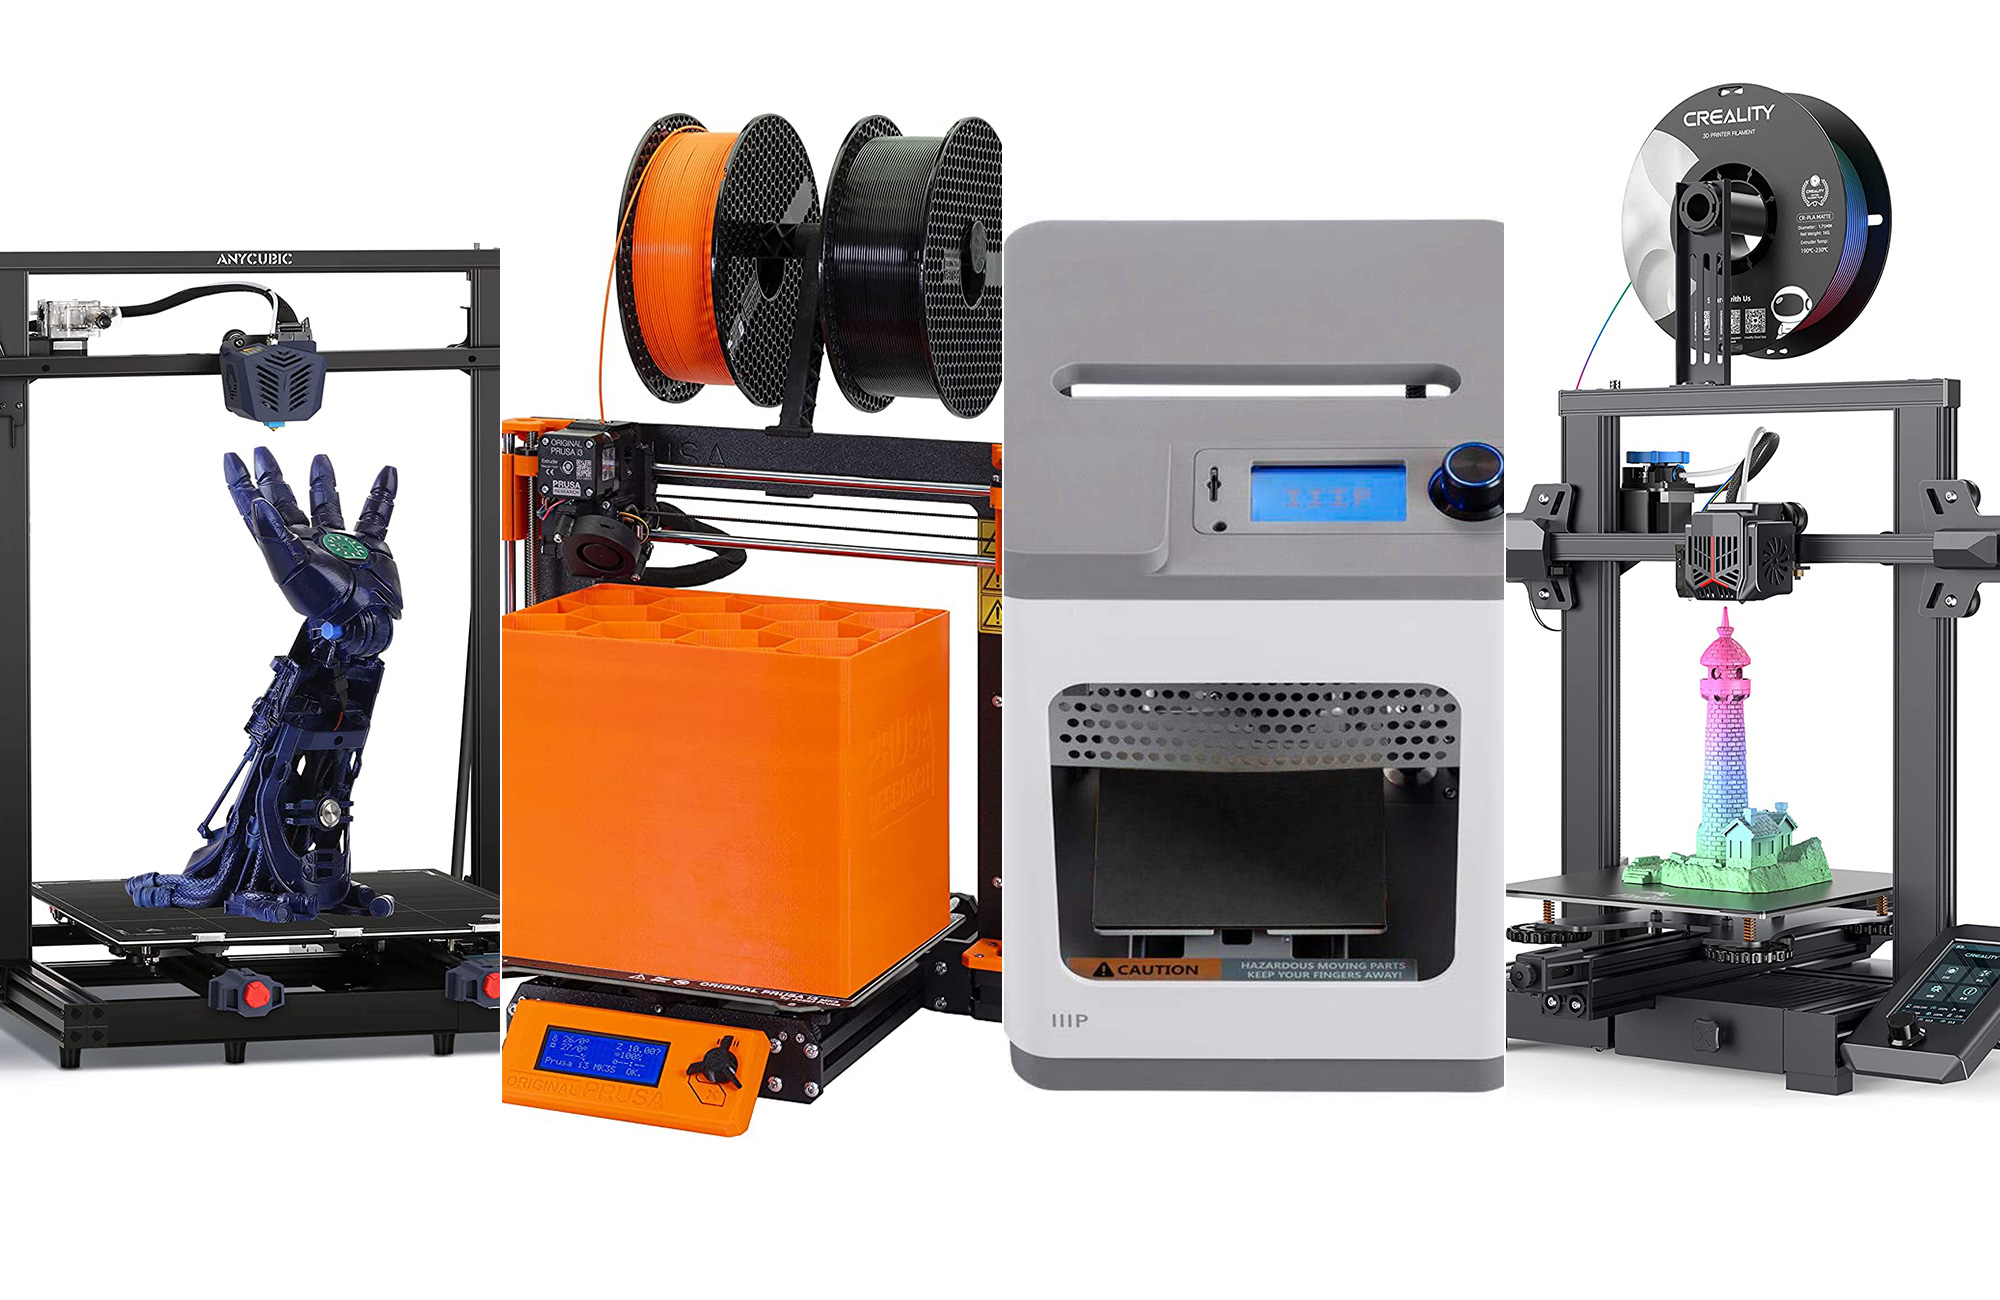 What Can 3D Printing Be Used For? Here Are 10 Amazing Examples